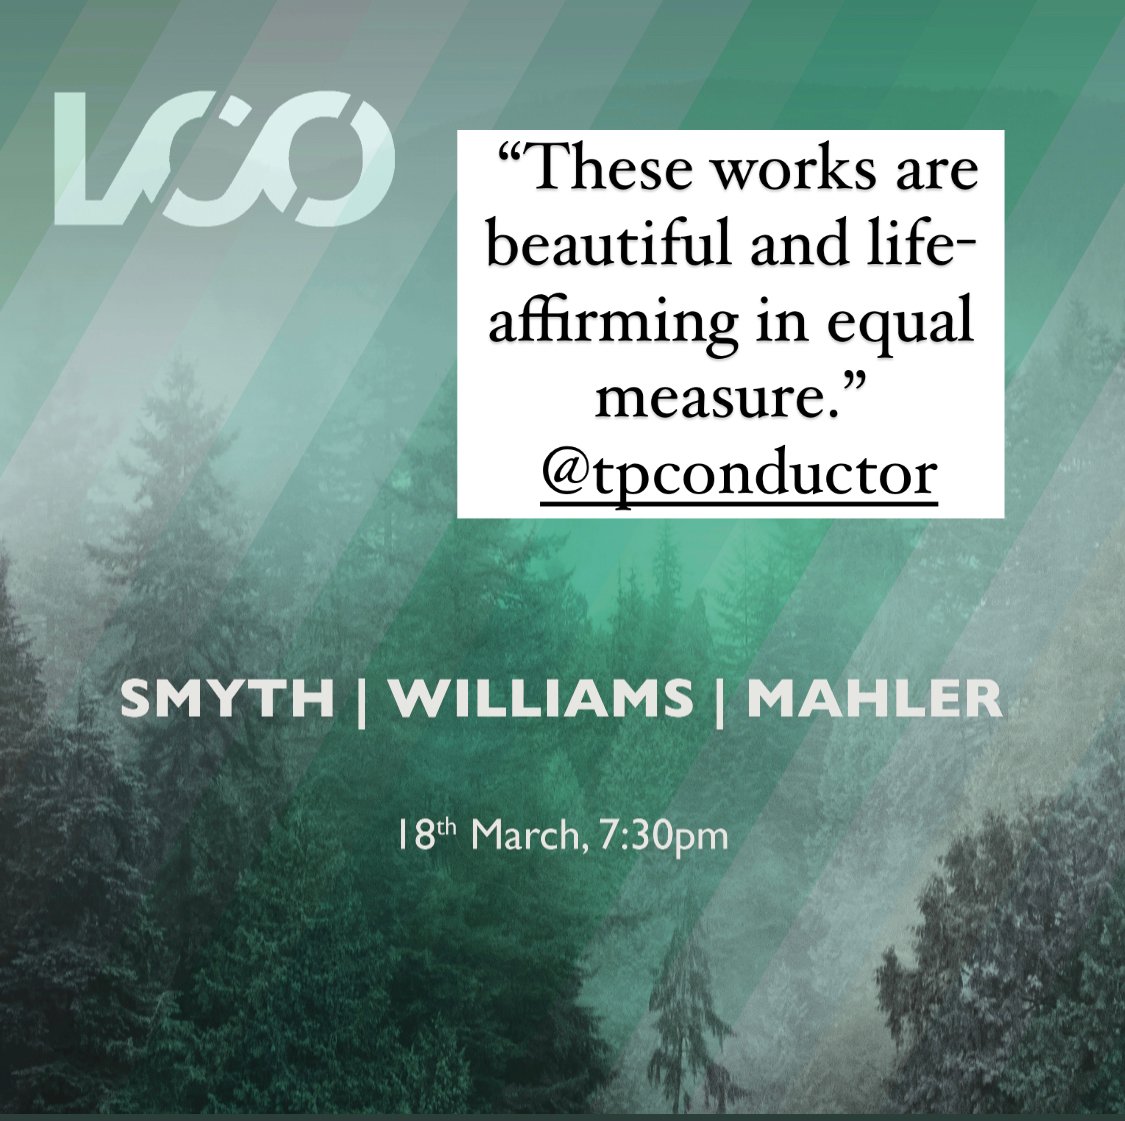 Have you booked your tickets yet? Come along on Sat 18 March and hear Mahler's 1st, the overture to The Wreckers by #EthelSmyth and the violin concerto by #GraceWilliams. A trio of uplifting works with elements of nature and folk music.  Book here: bit.ly/3HcTDFx